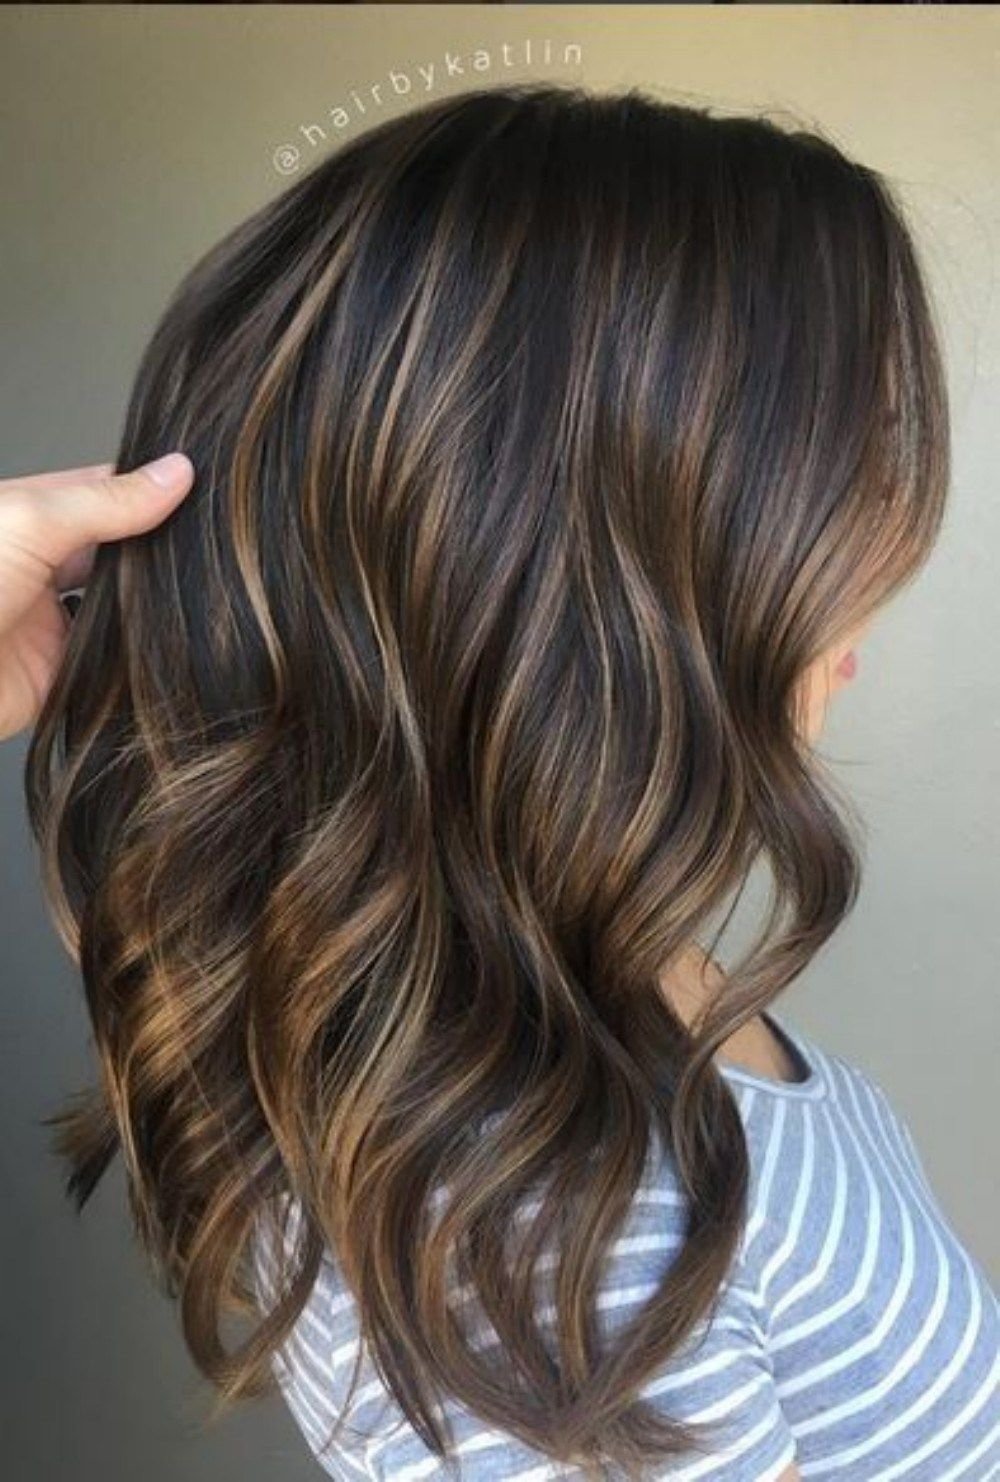 10 Gorgeous Hair Color Ideas For Dark Hair top brunette hair color ideas to try 2017 17 hairstyle 11 2022